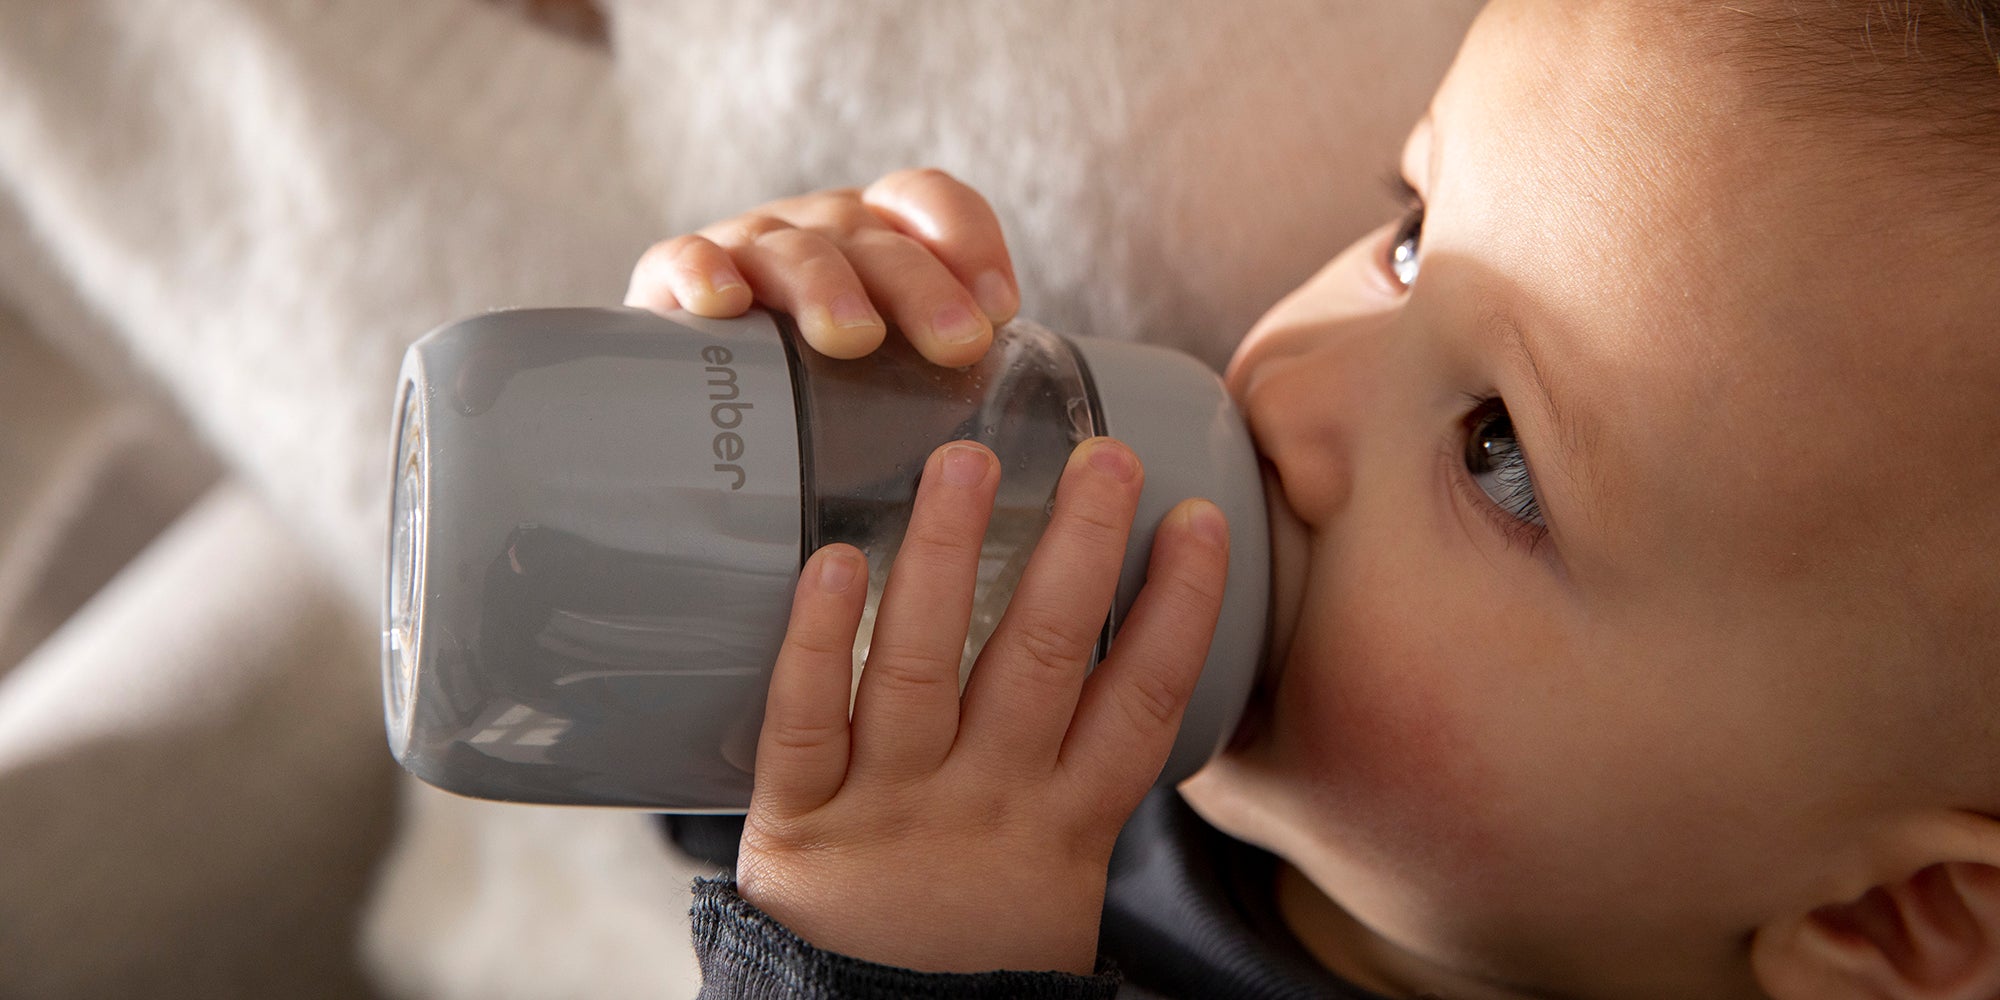 Bottle-Feeding 101: How to Bottle-Feed a Baby